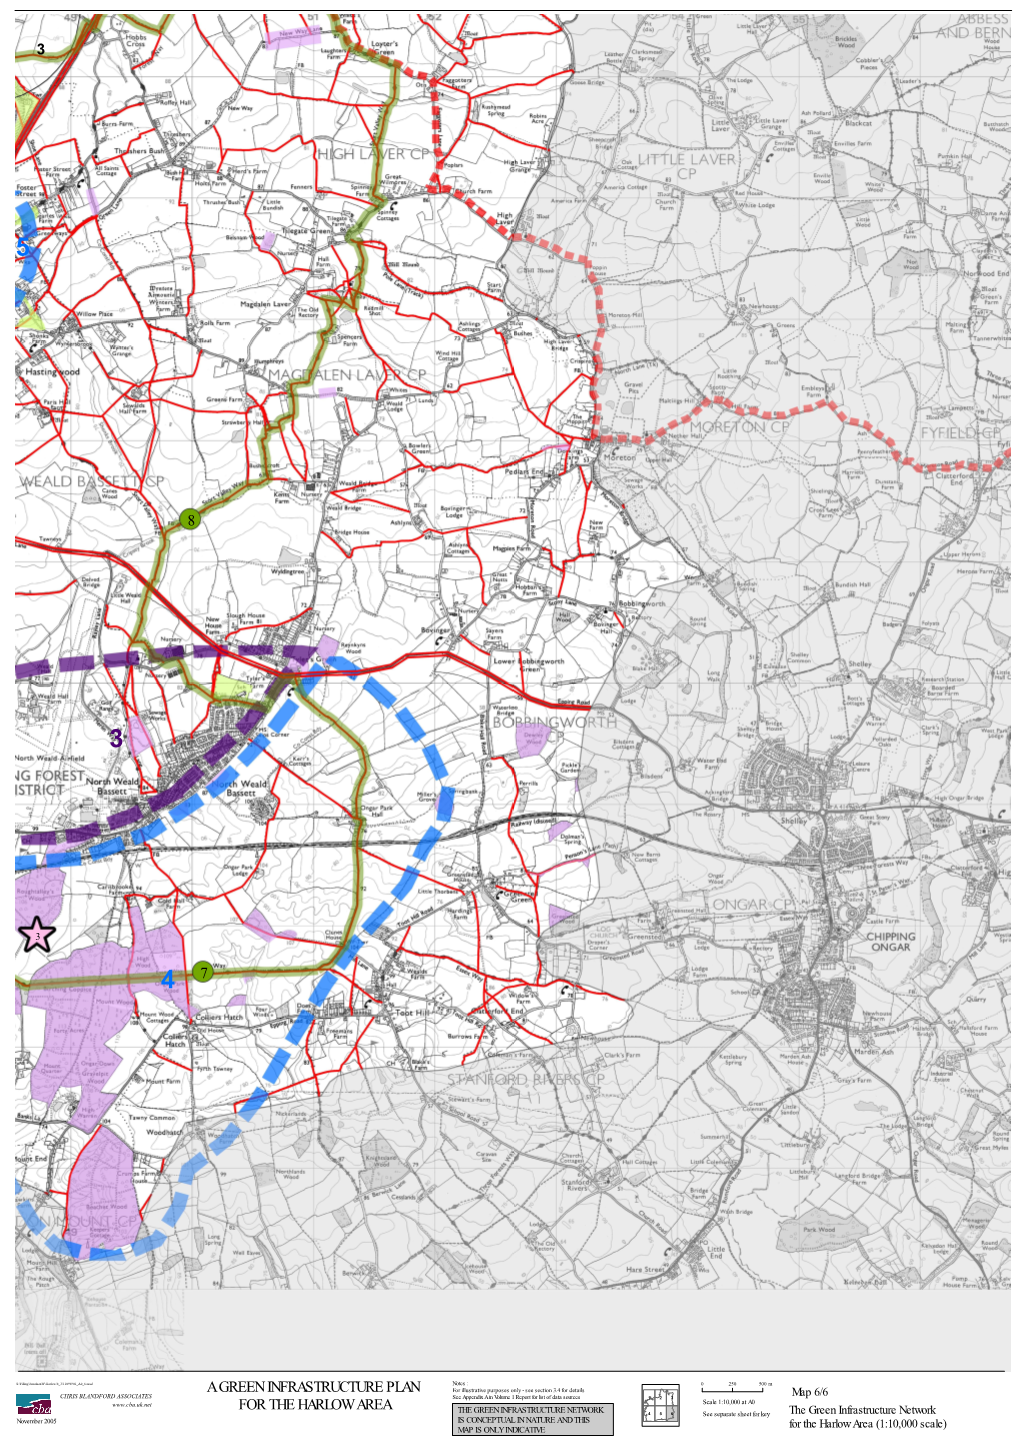 3 8 7 a Green Infrastructure Plan for the Harlow Area